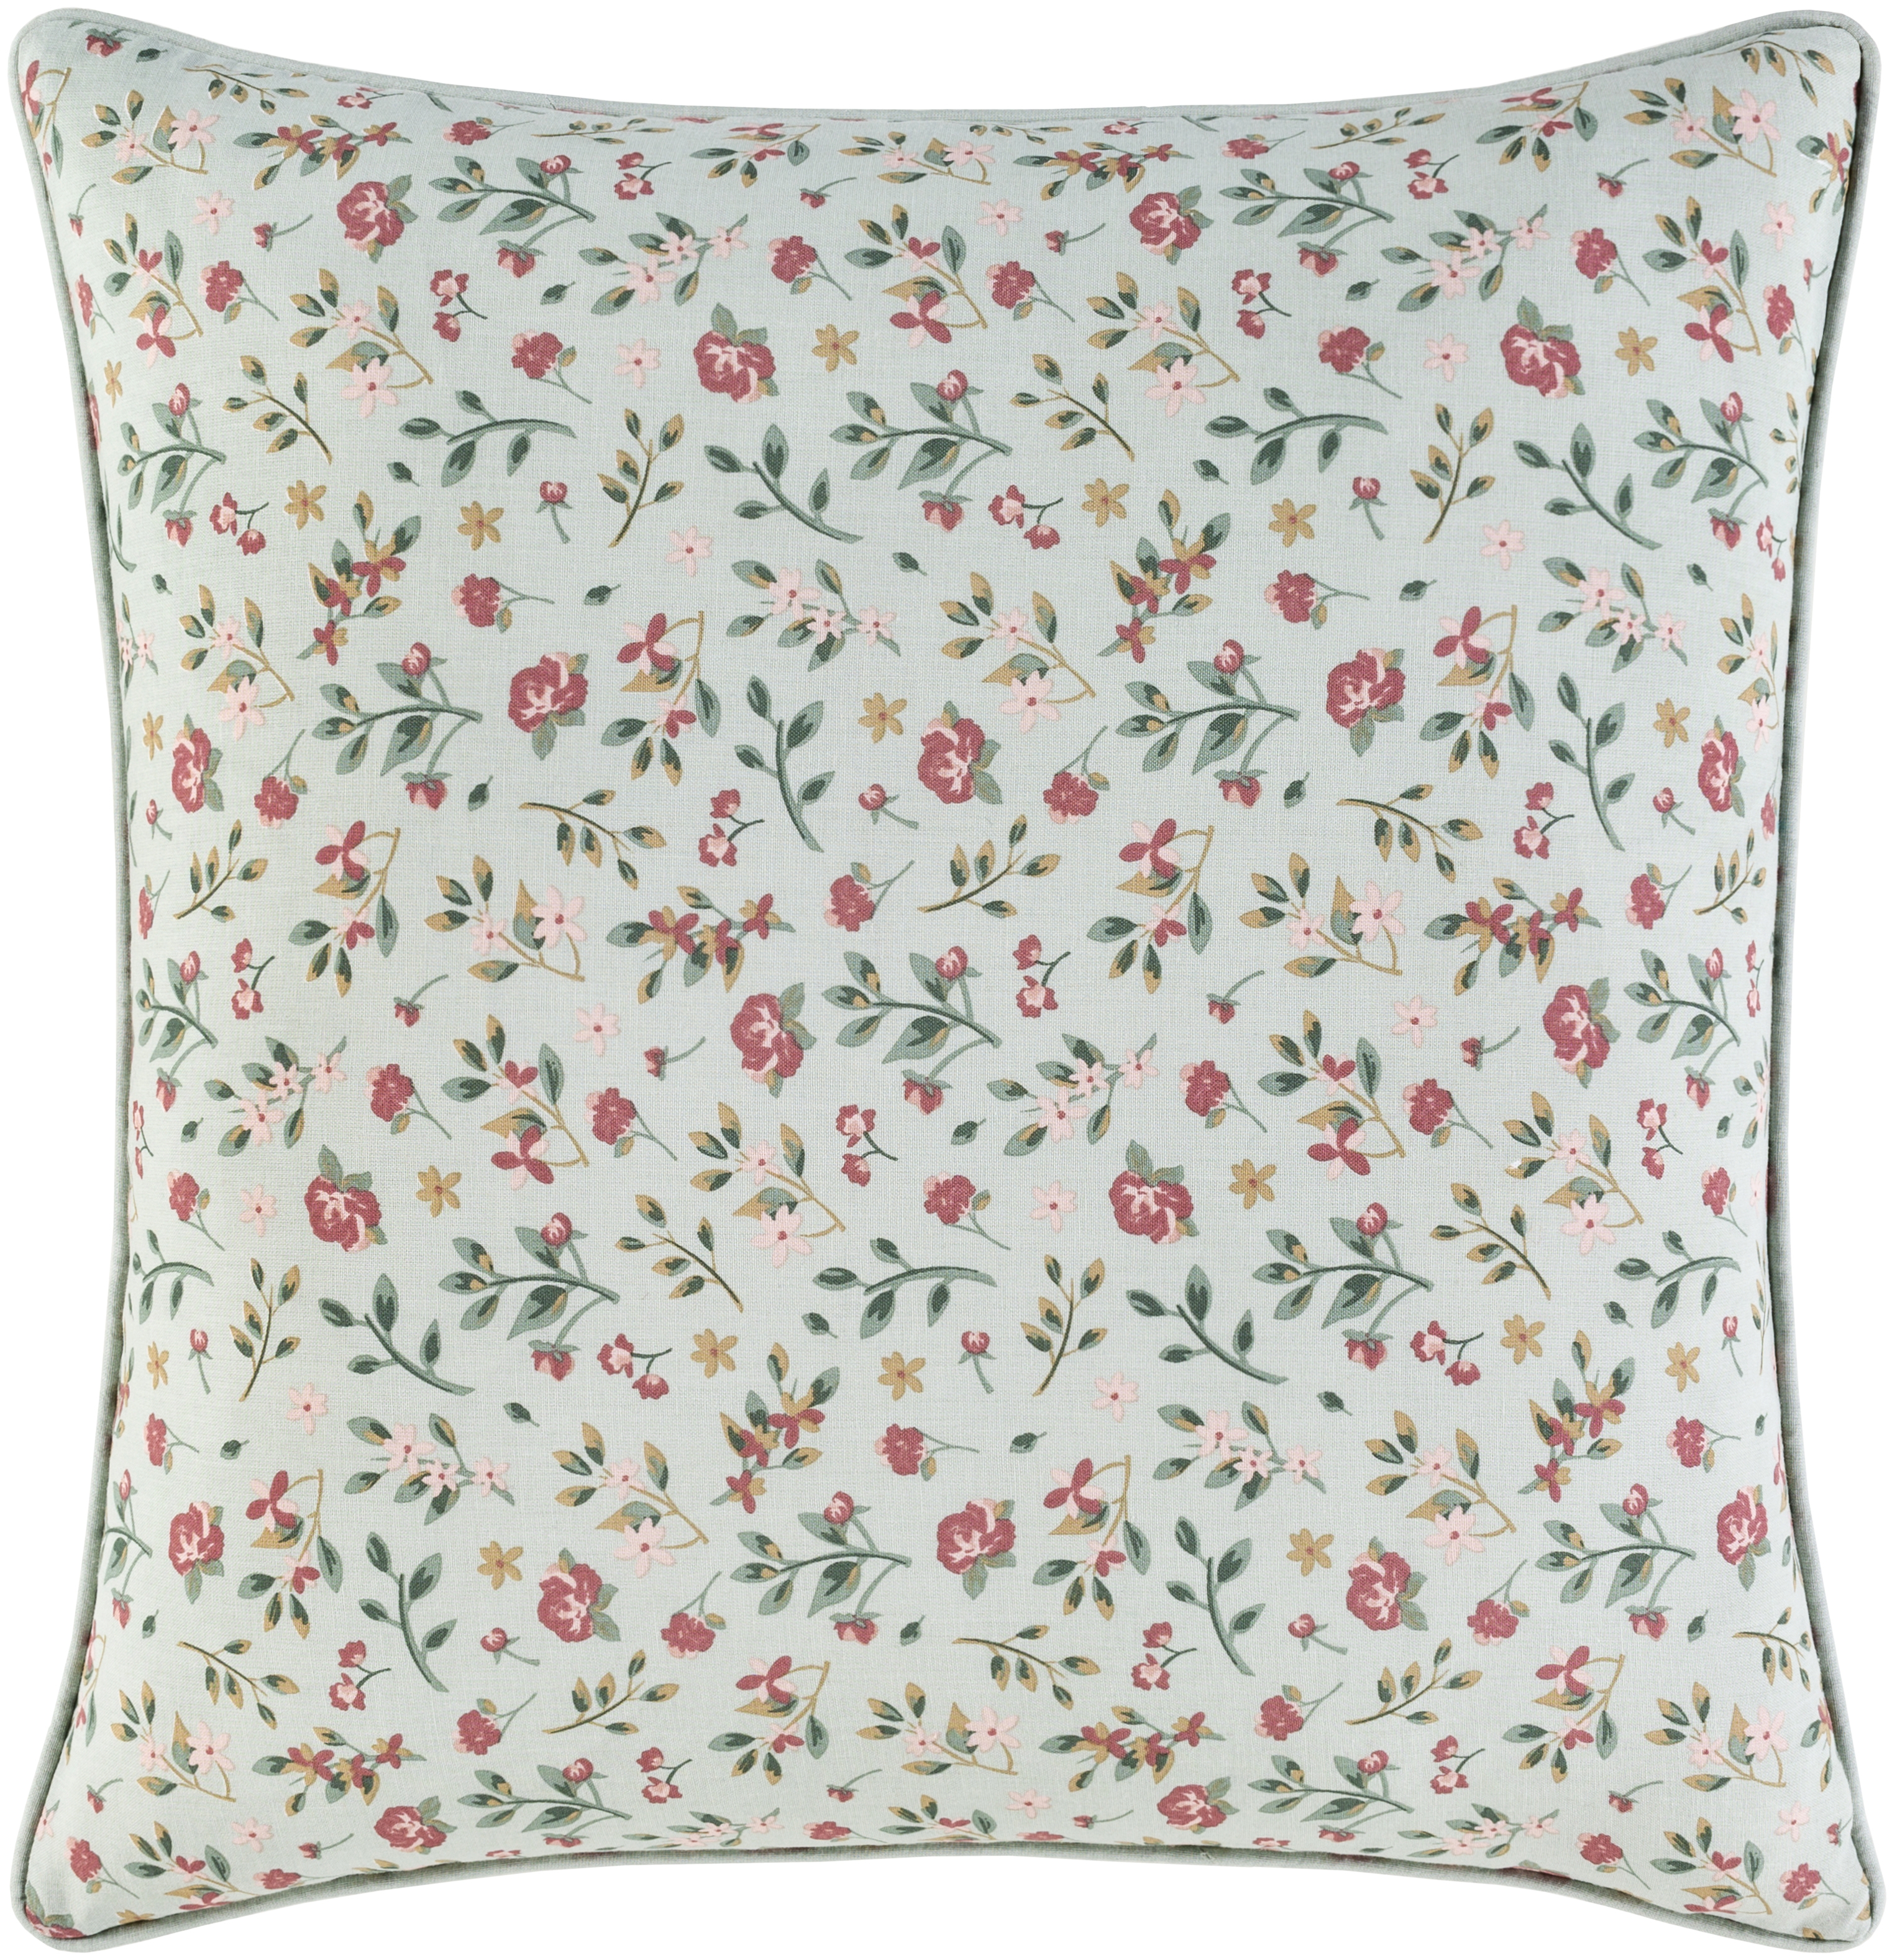 Floret Throw Pillow, 20" x 20", with poly insert - Image 0